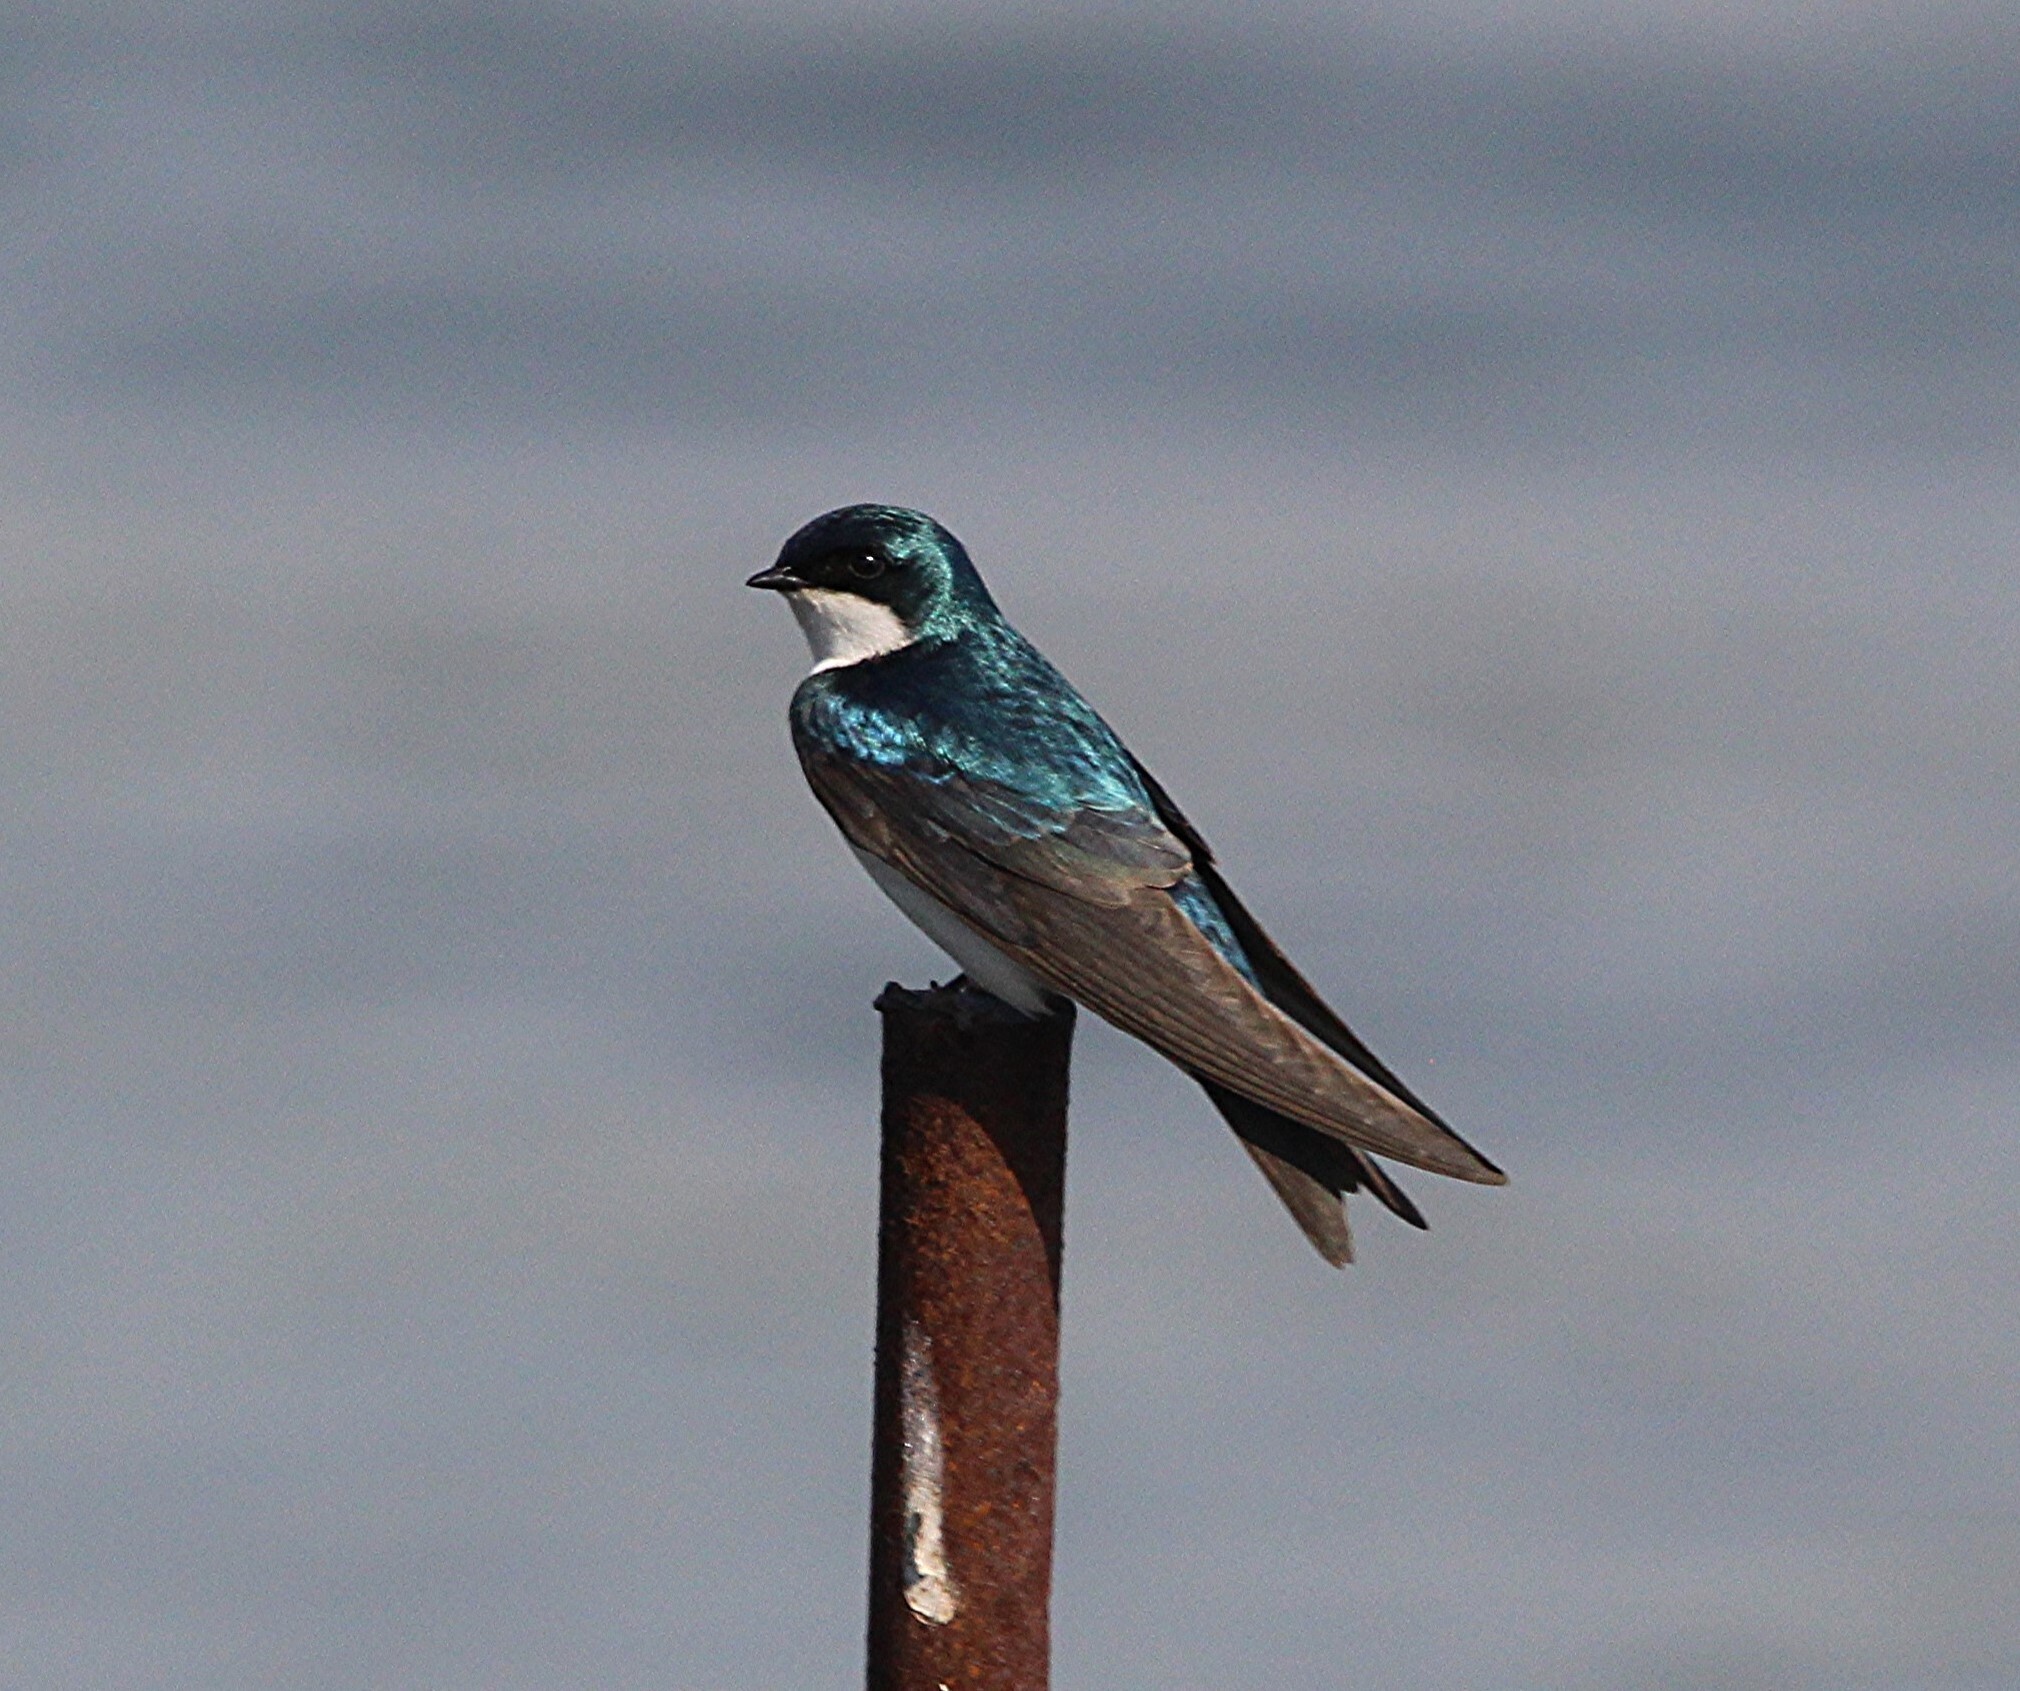 A male Tree Swallow glistens in the sun at Heritag Park. Photo: <a href="https://www.flickr.com/photos/89780664@N05/" target="_blank">Dave Ostapiuk</a>